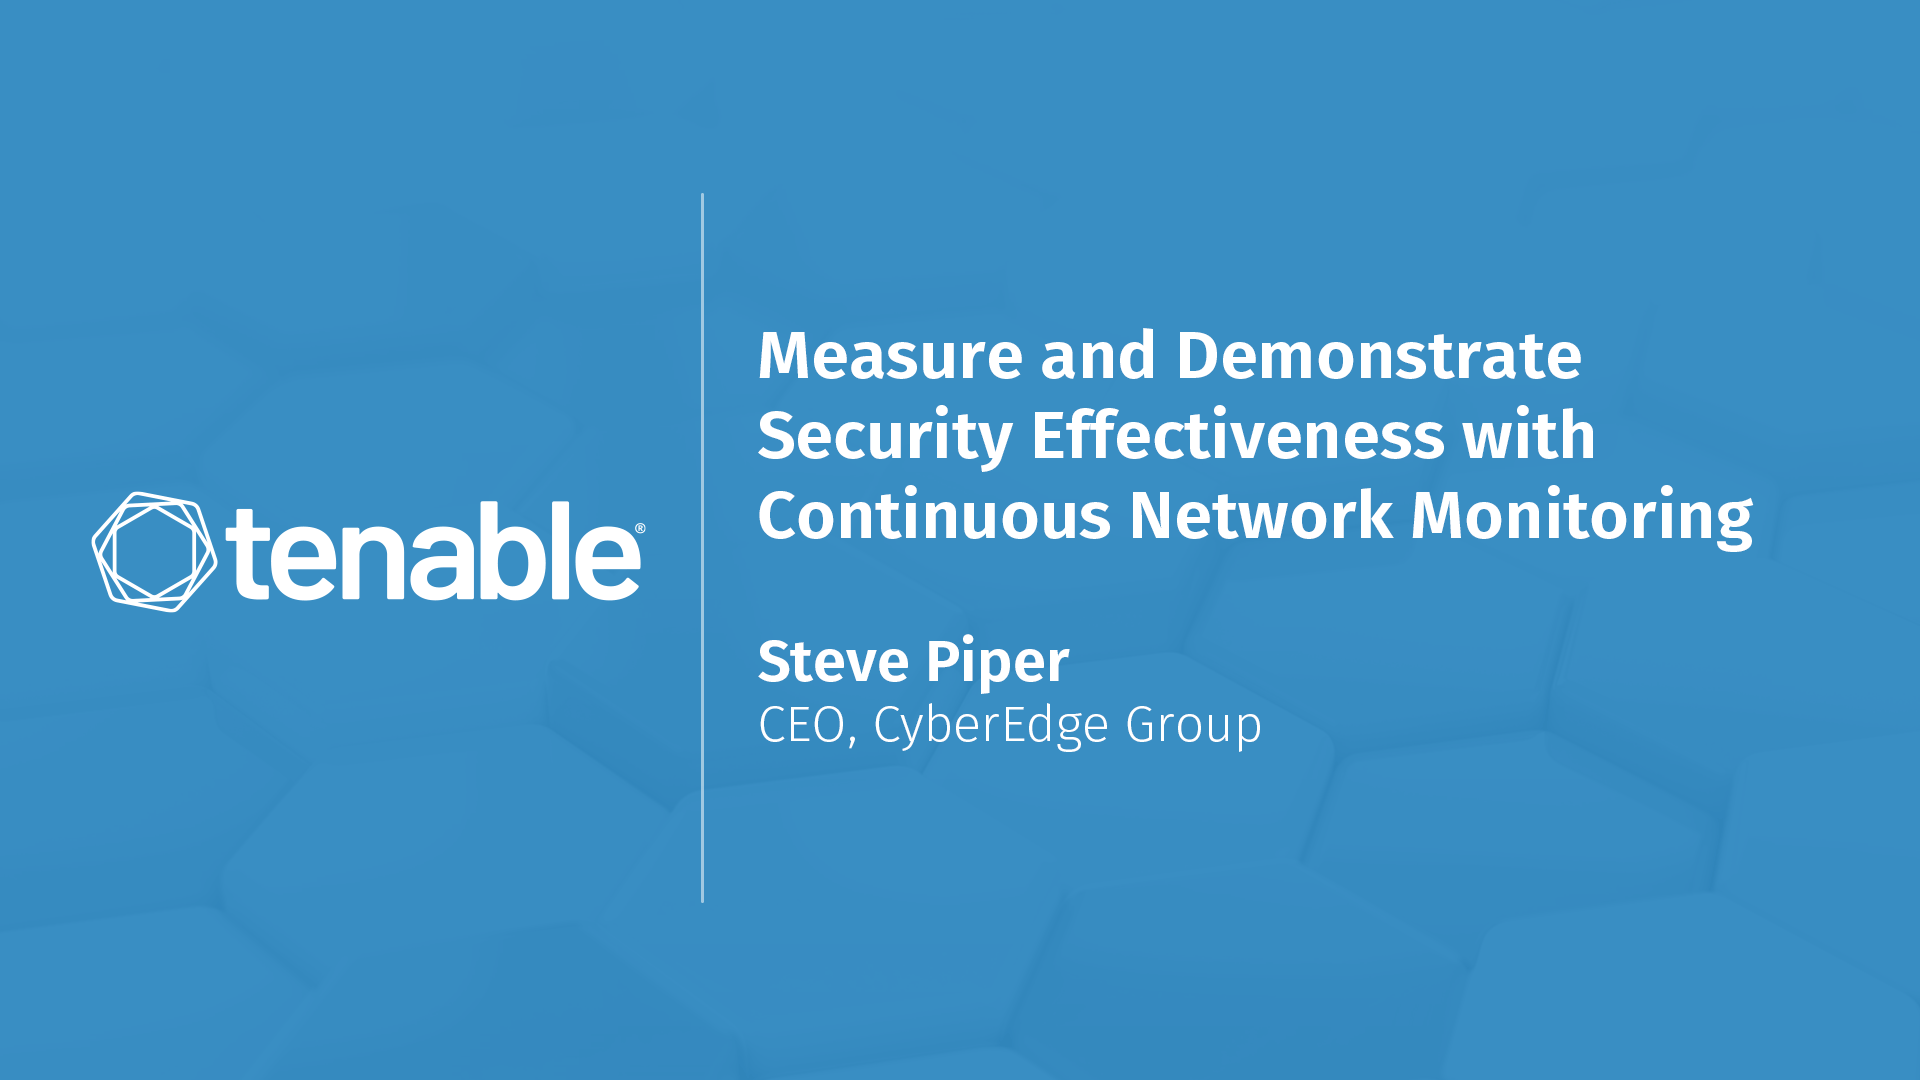 Network Monitoring on Demand Measure and Demonstrate Security Effectiveness with Continuous Network Monitoring